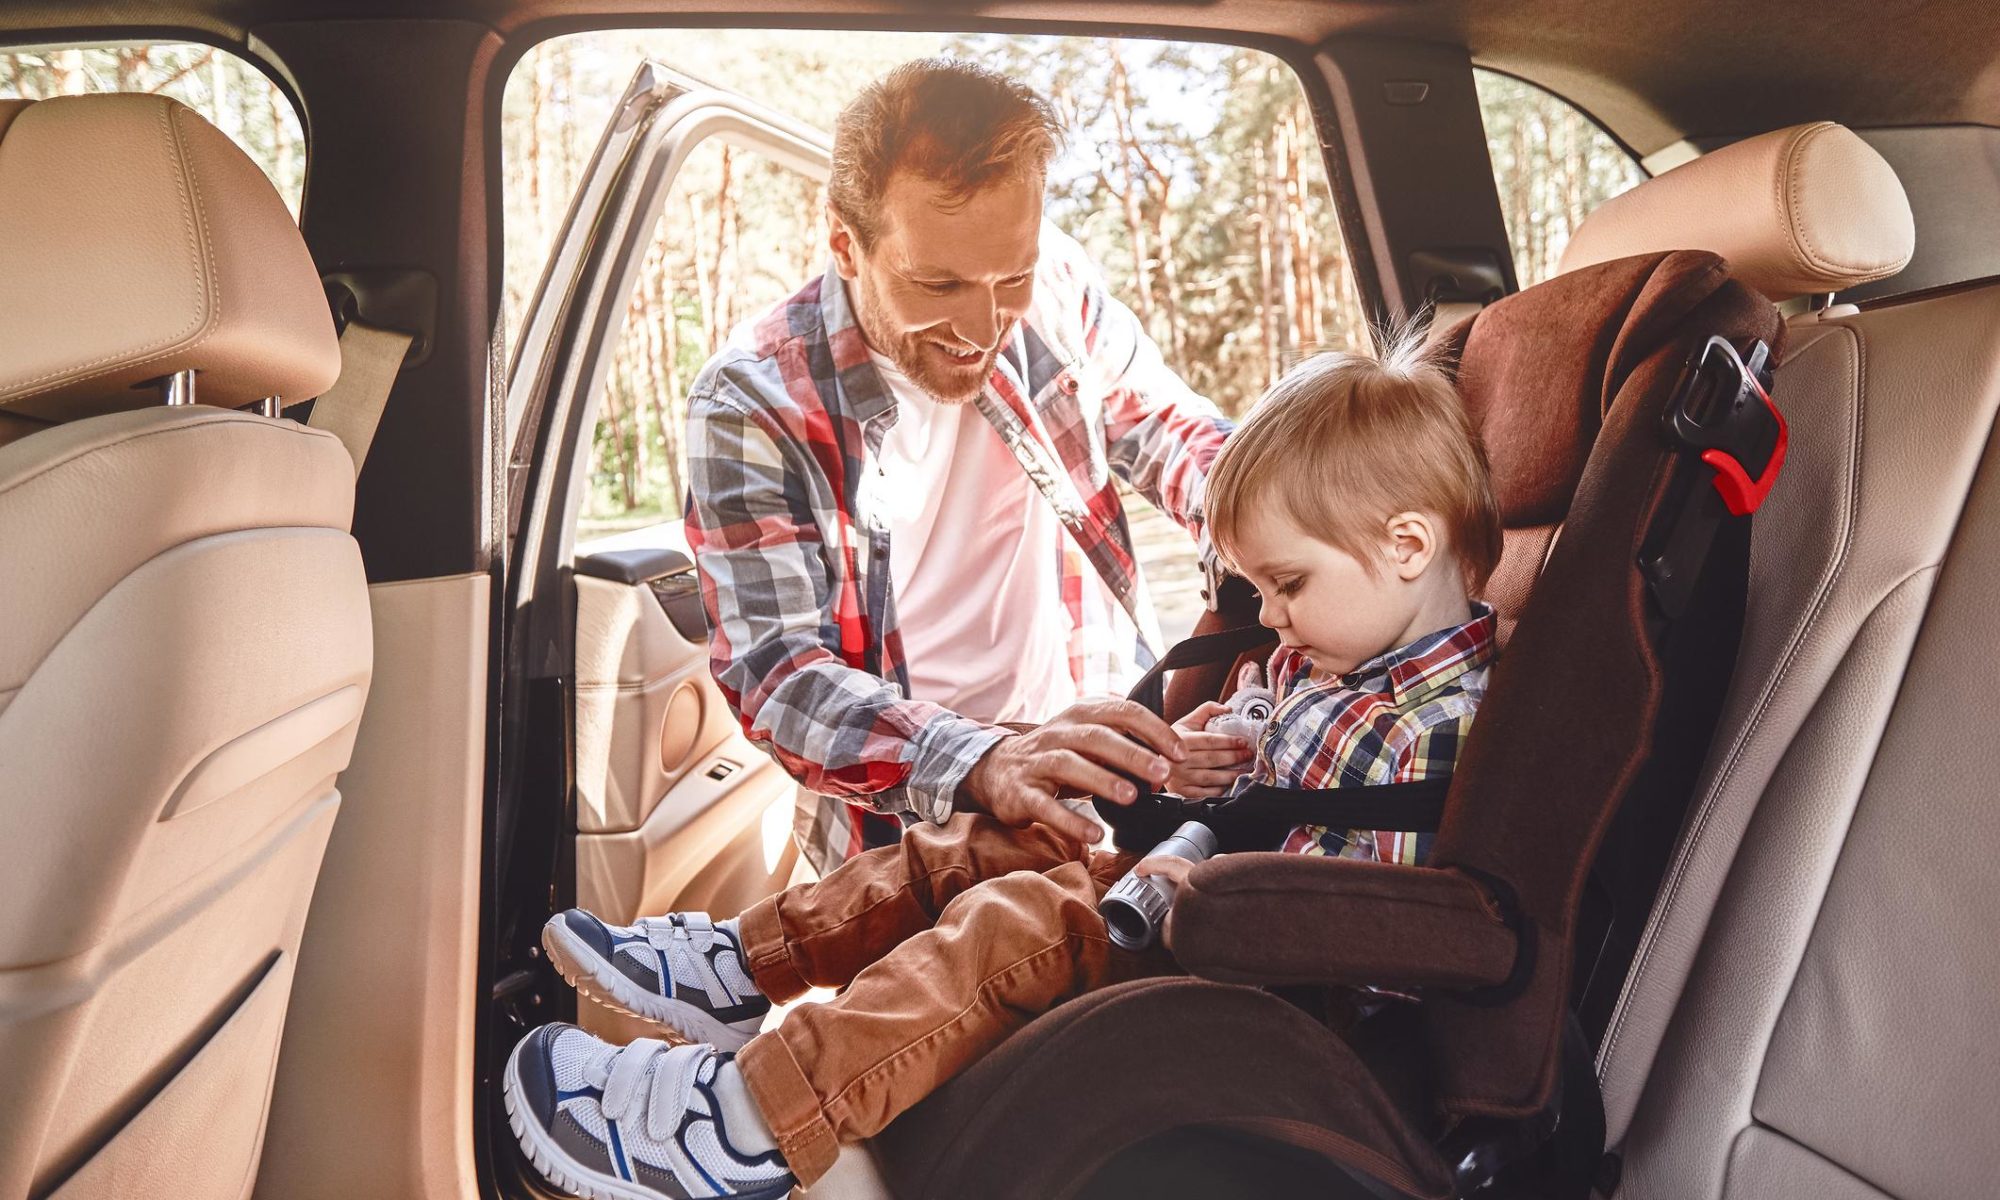 Nearly Half the Children Killed in Car Crashes Are Improperly Restrained | Ted B. Lyon & Associates | iStock-1133373272